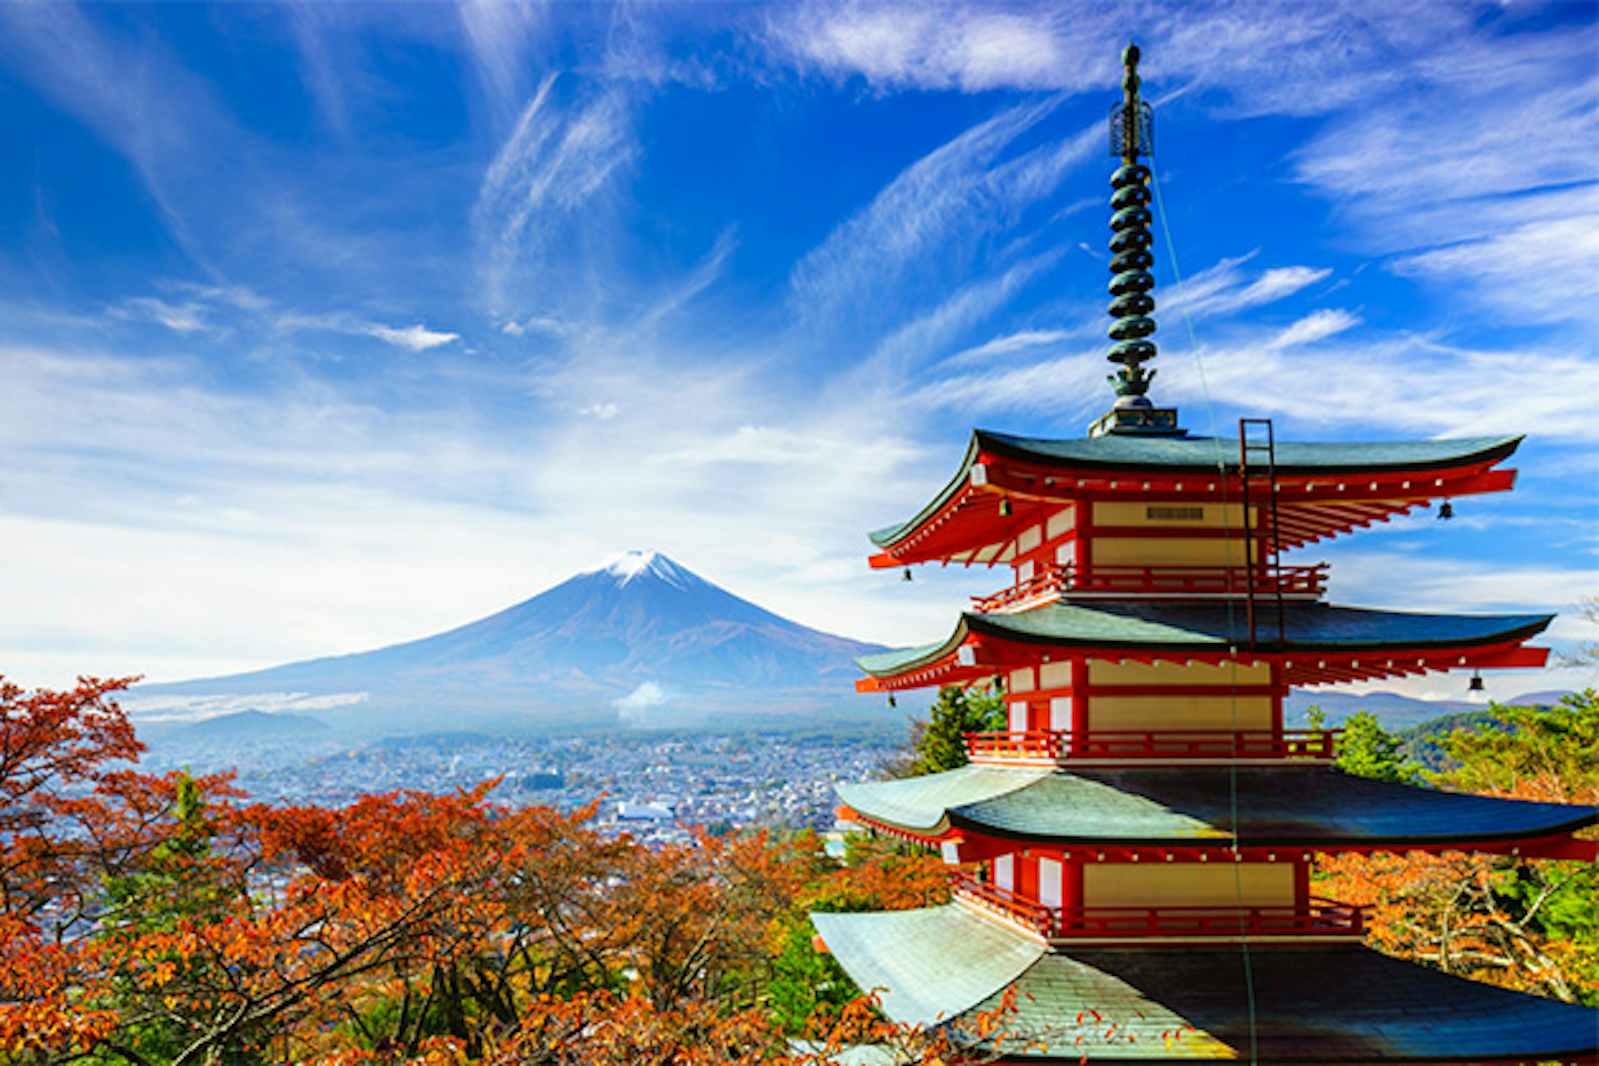 Mount Fuji and a temple